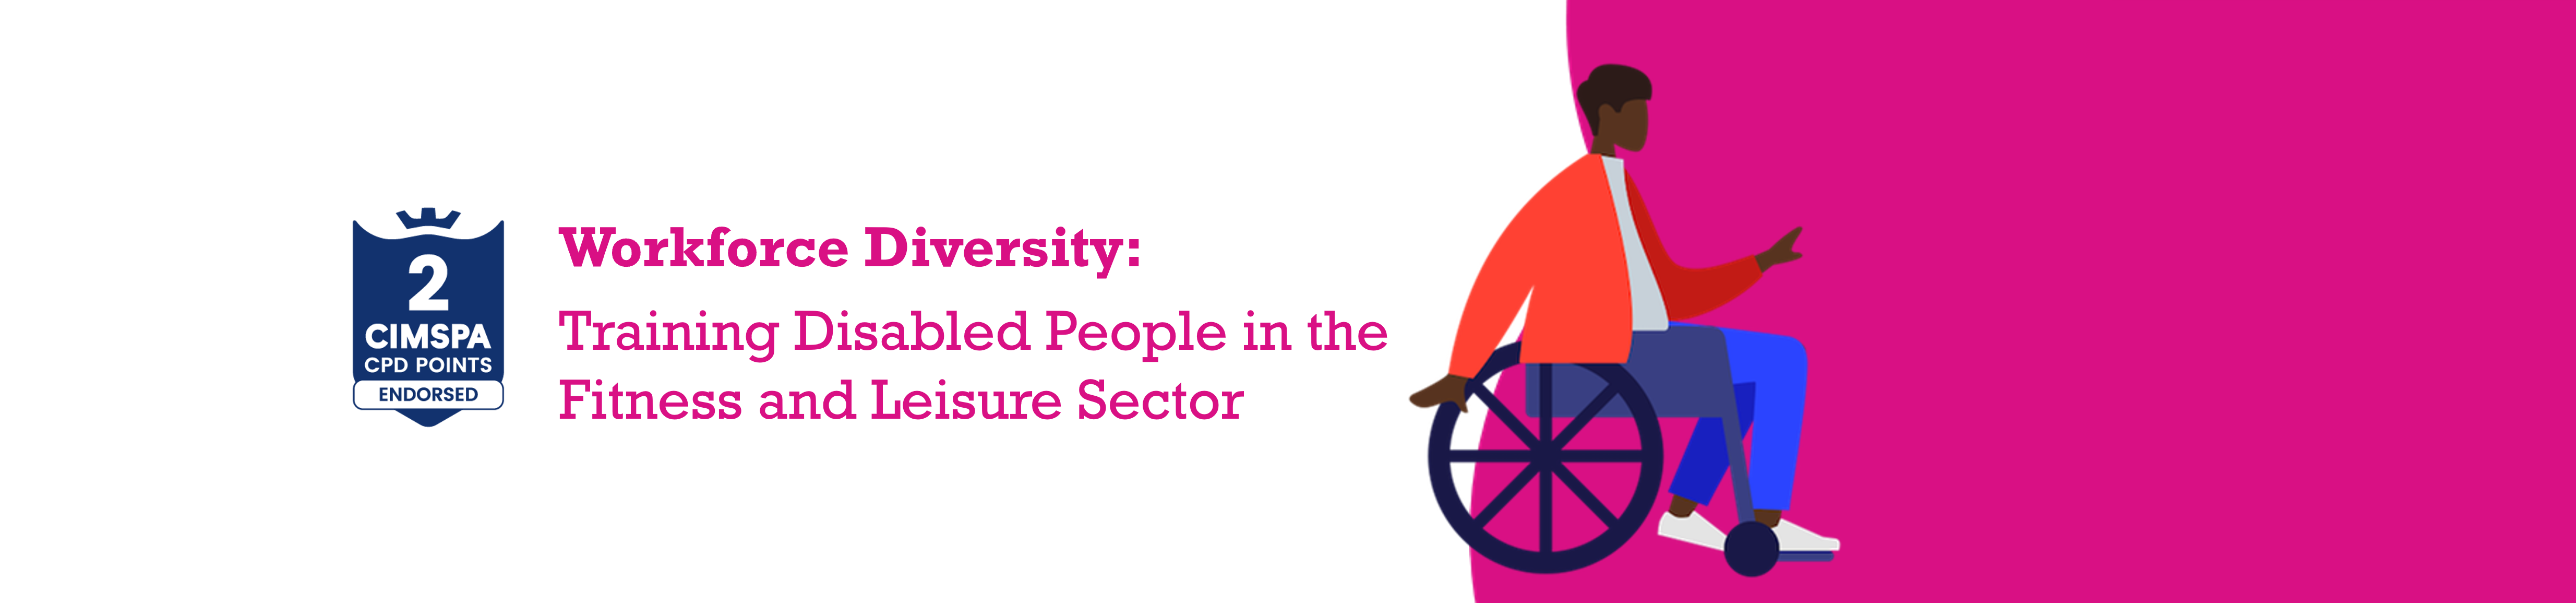 Workforce Diversity – Training Disabled People in the Fitness and Leisure Sector